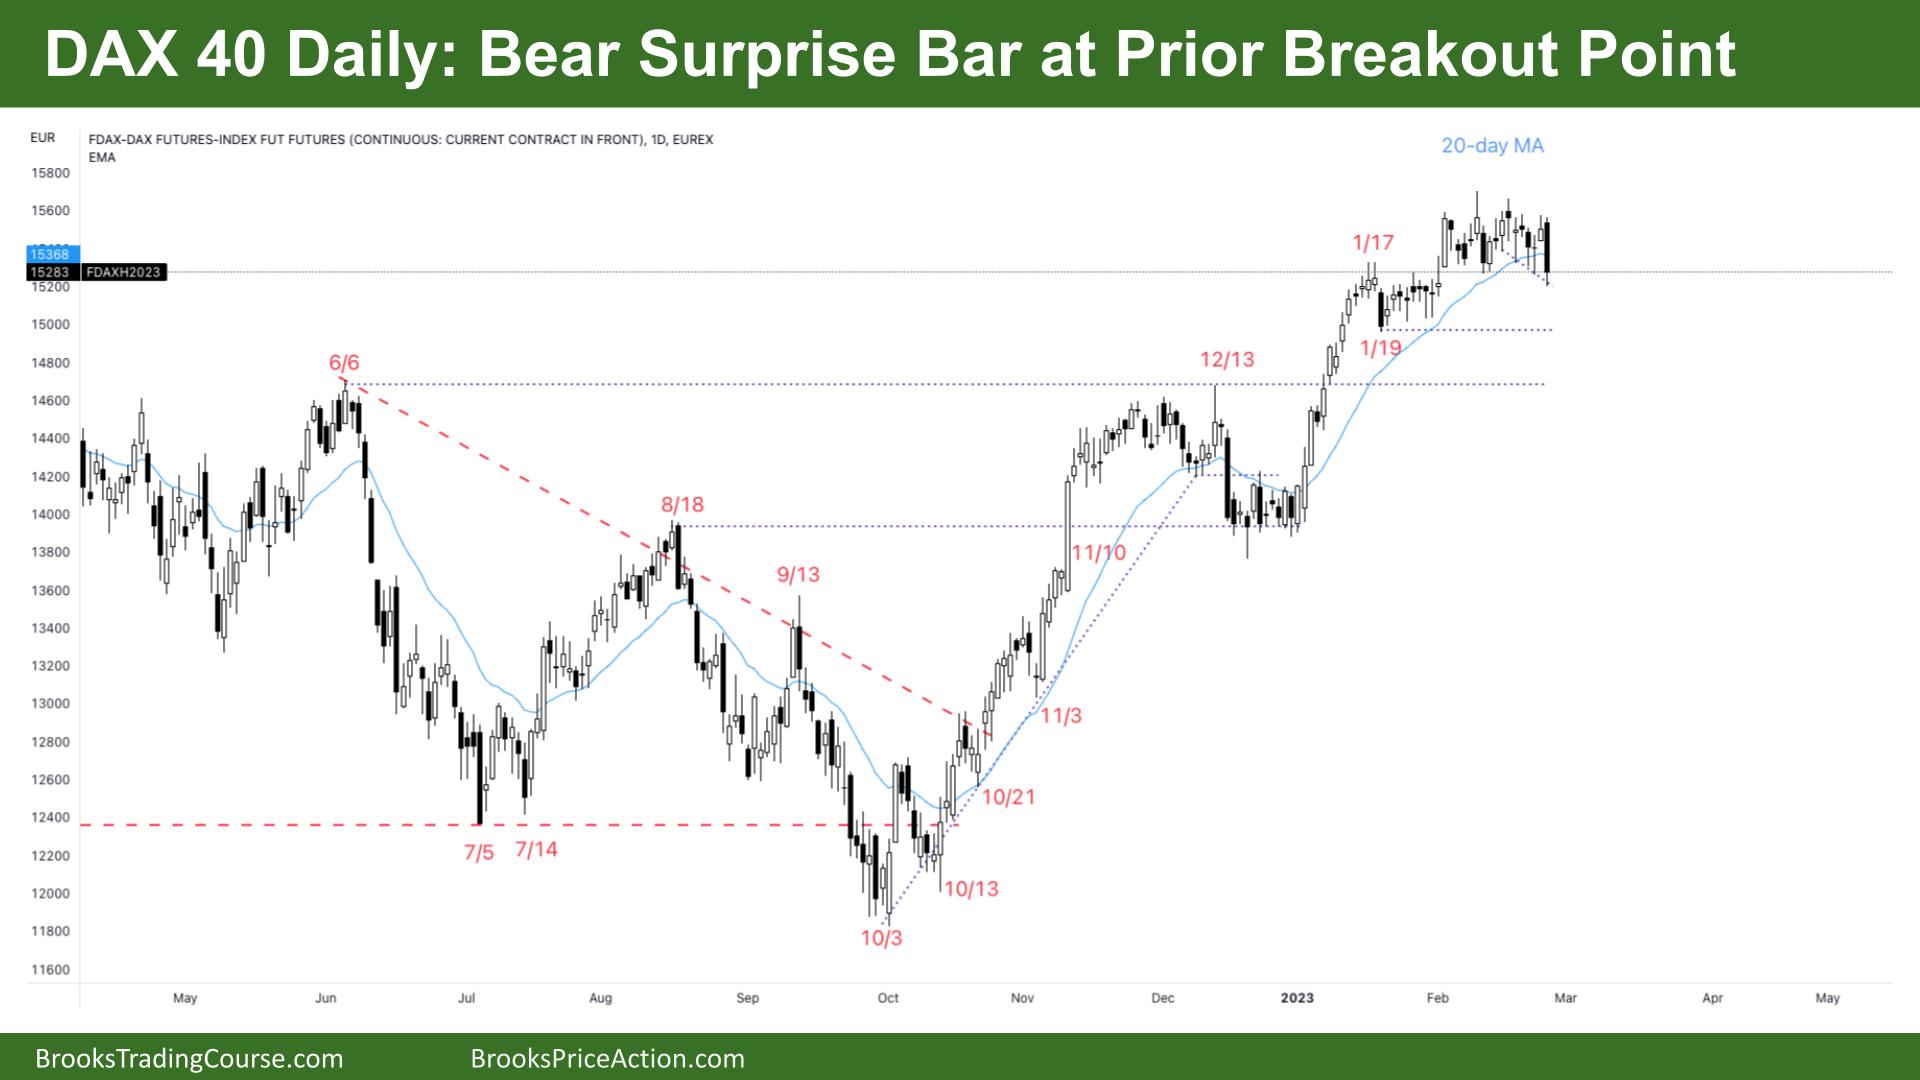 DAX 40 Bear Surprise Bar at Prior Breakout Point